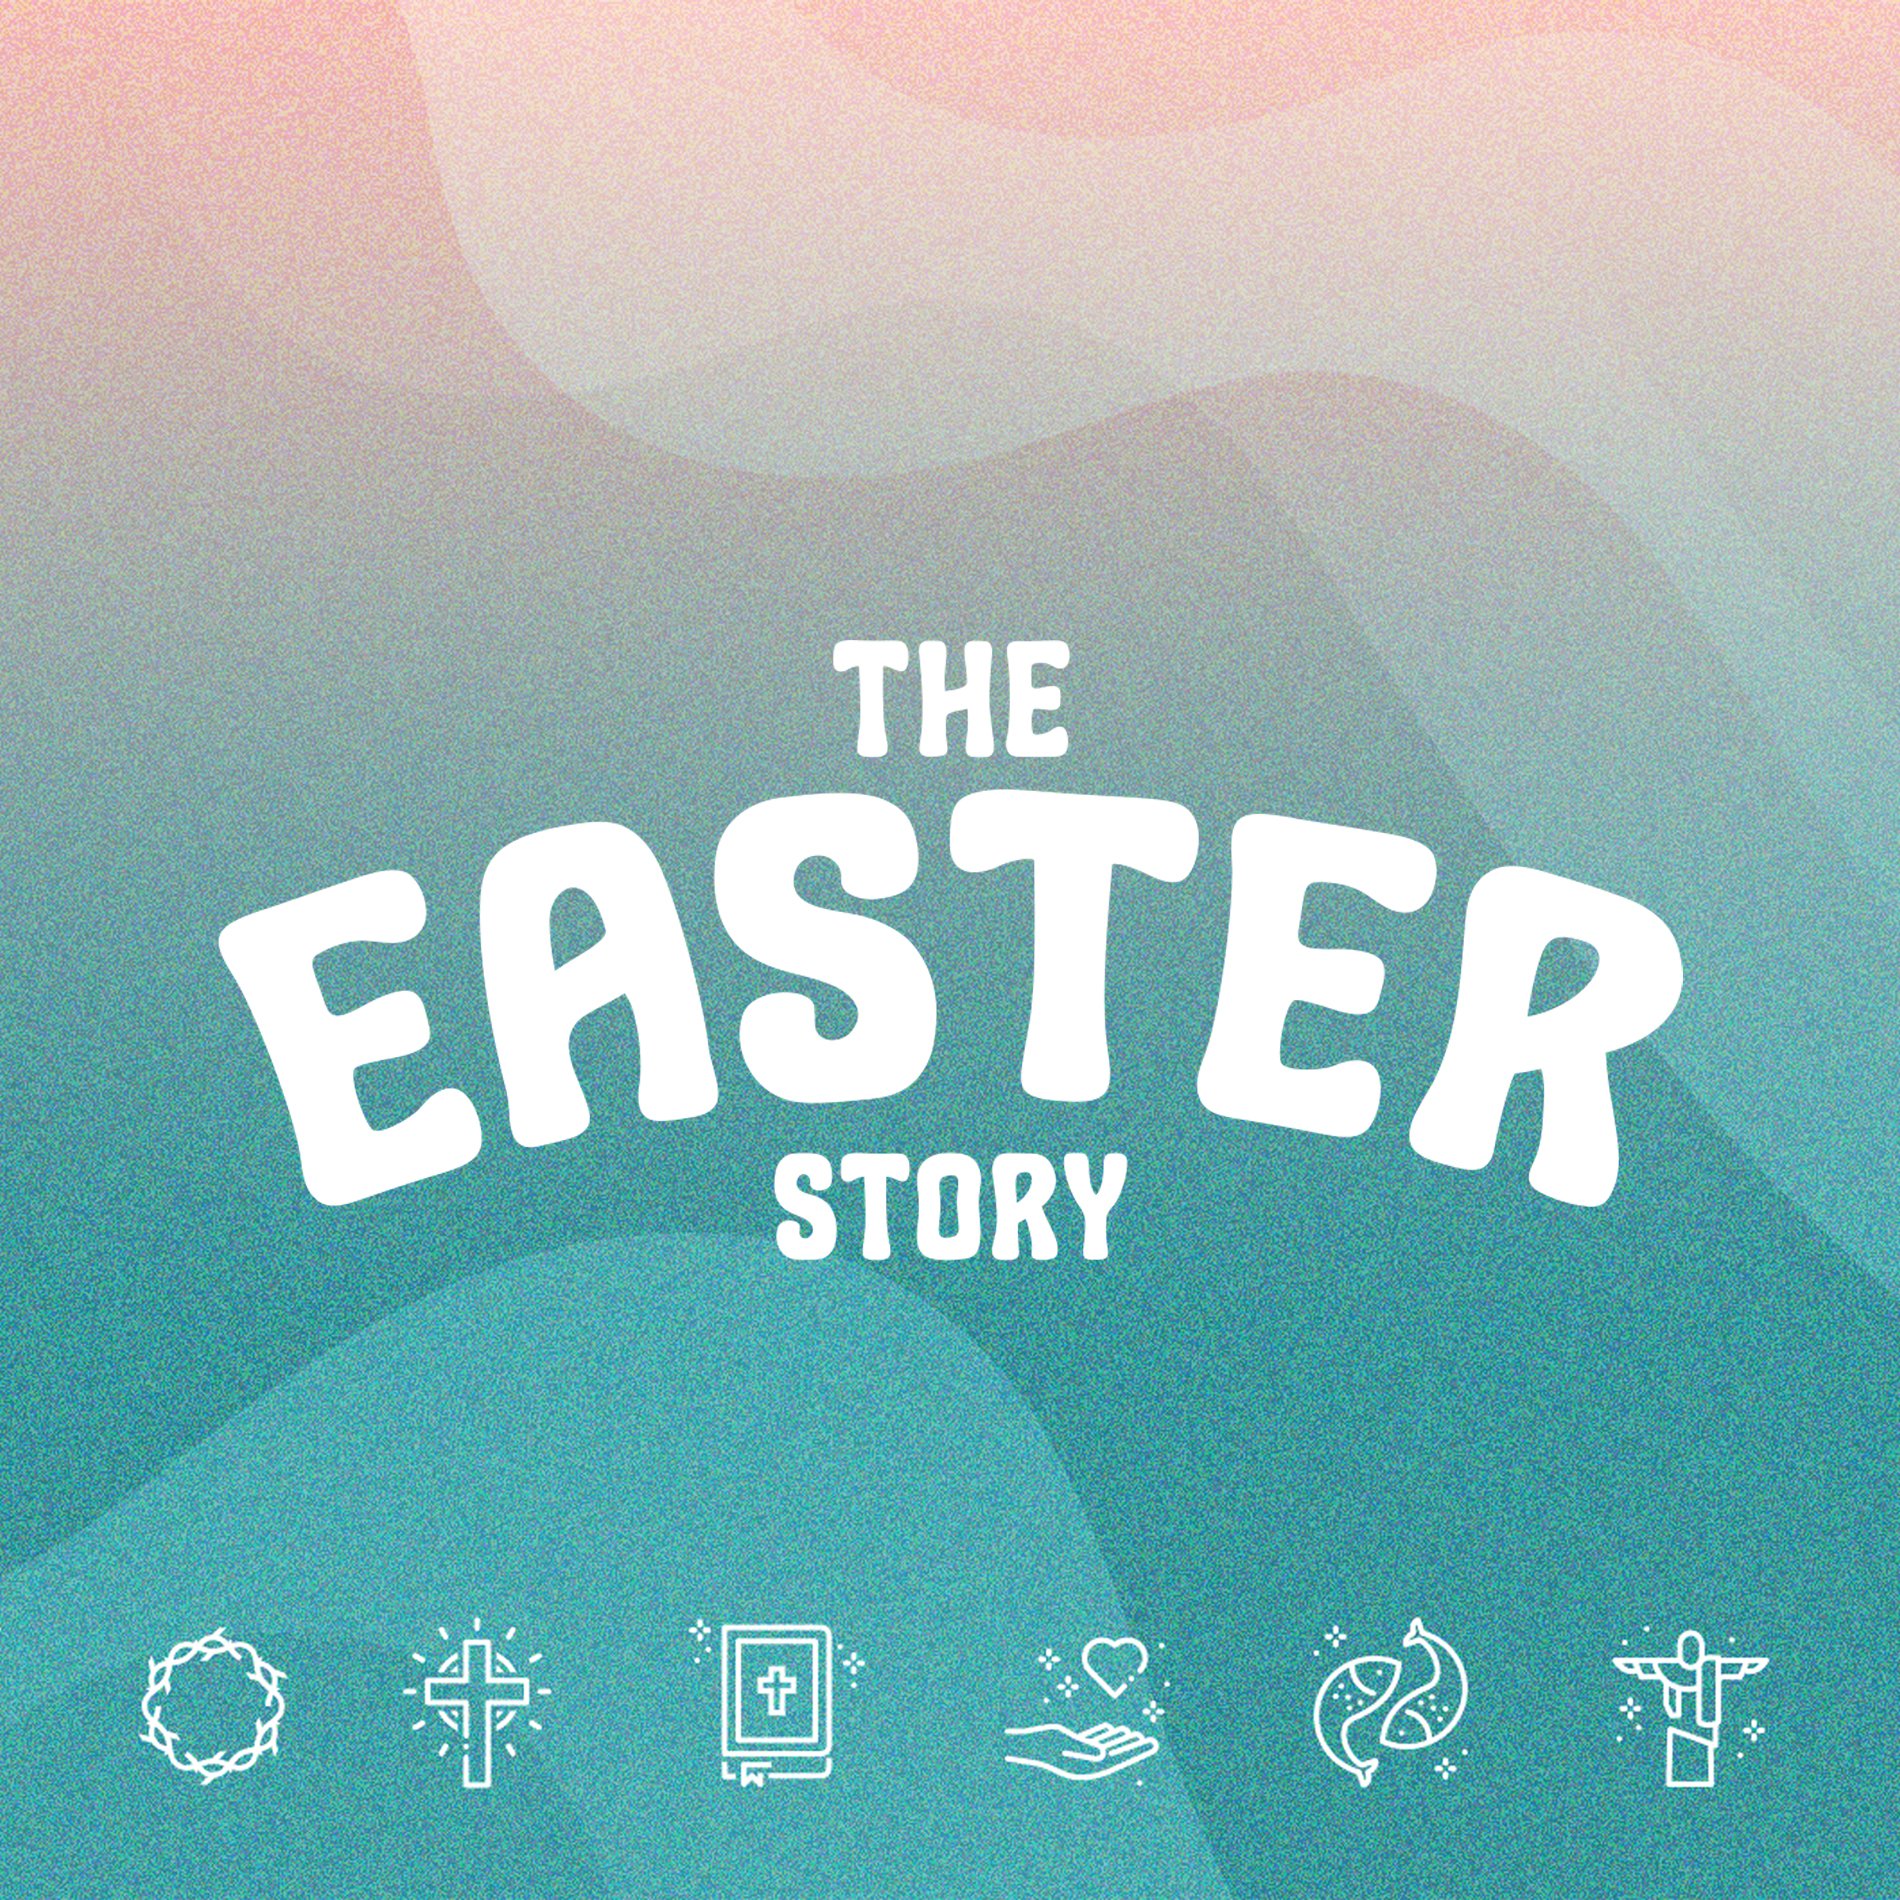 Product image for The Easter Story - Children's Curriculum